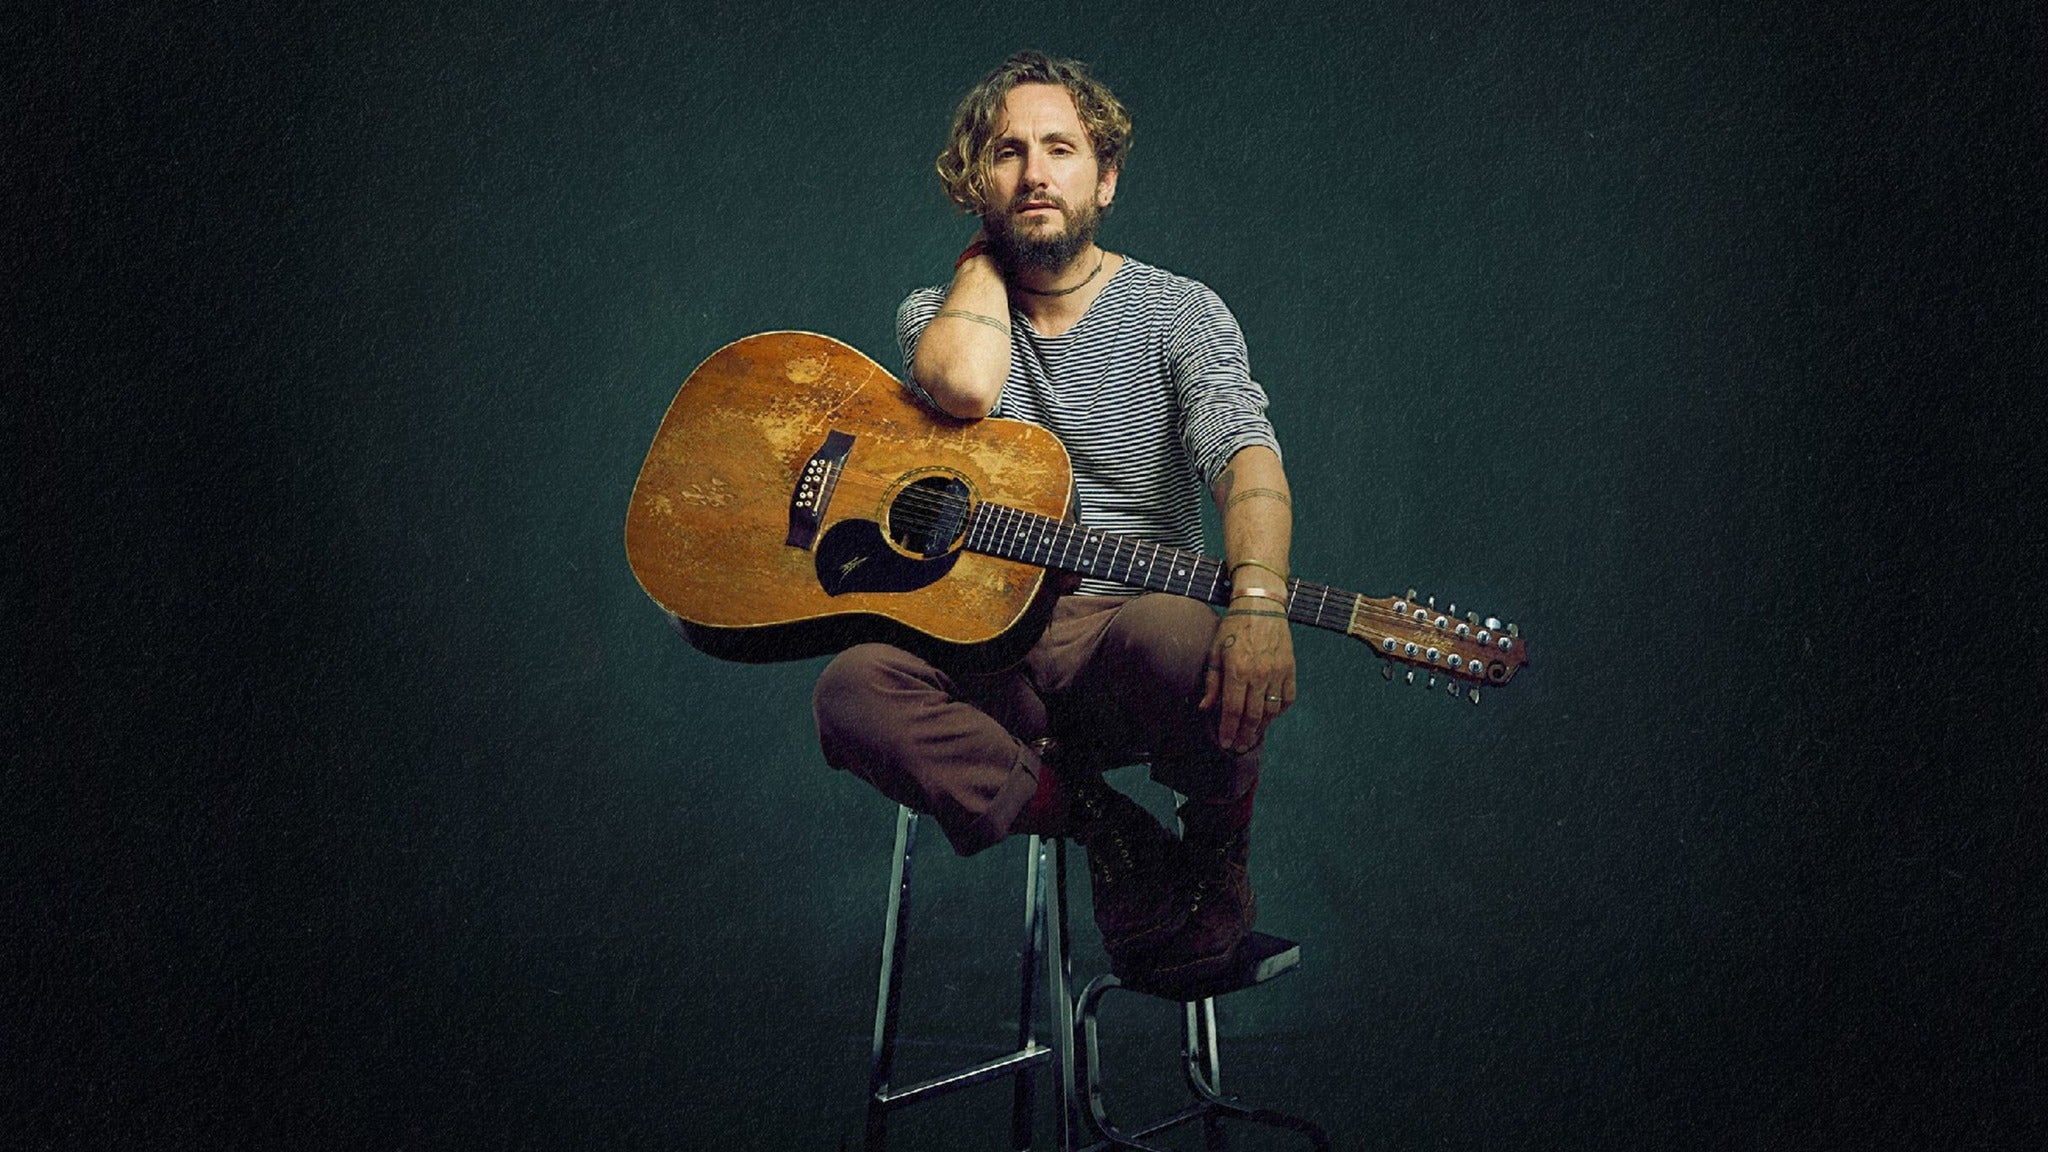 Image used with permission from Ticketmaster | John Butler and Kasey Chambers tickets